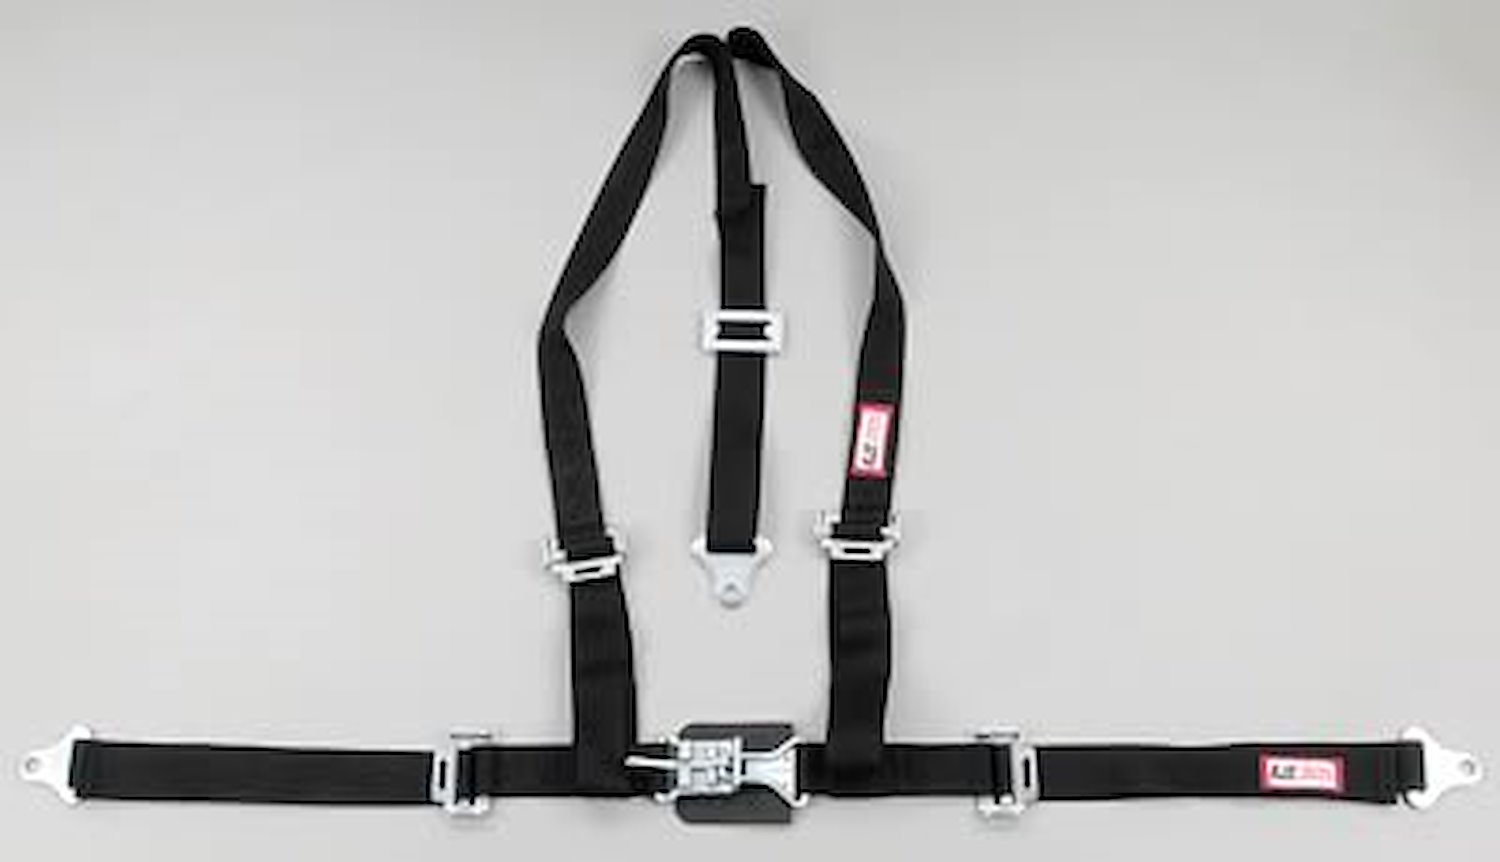 NON-SFI L&L HARNESS 3 PULL DOWN Lap Belt SEWN IN 2 S.H. Individual ROLL BAR Mount ALL WRAP ENDS BLACK